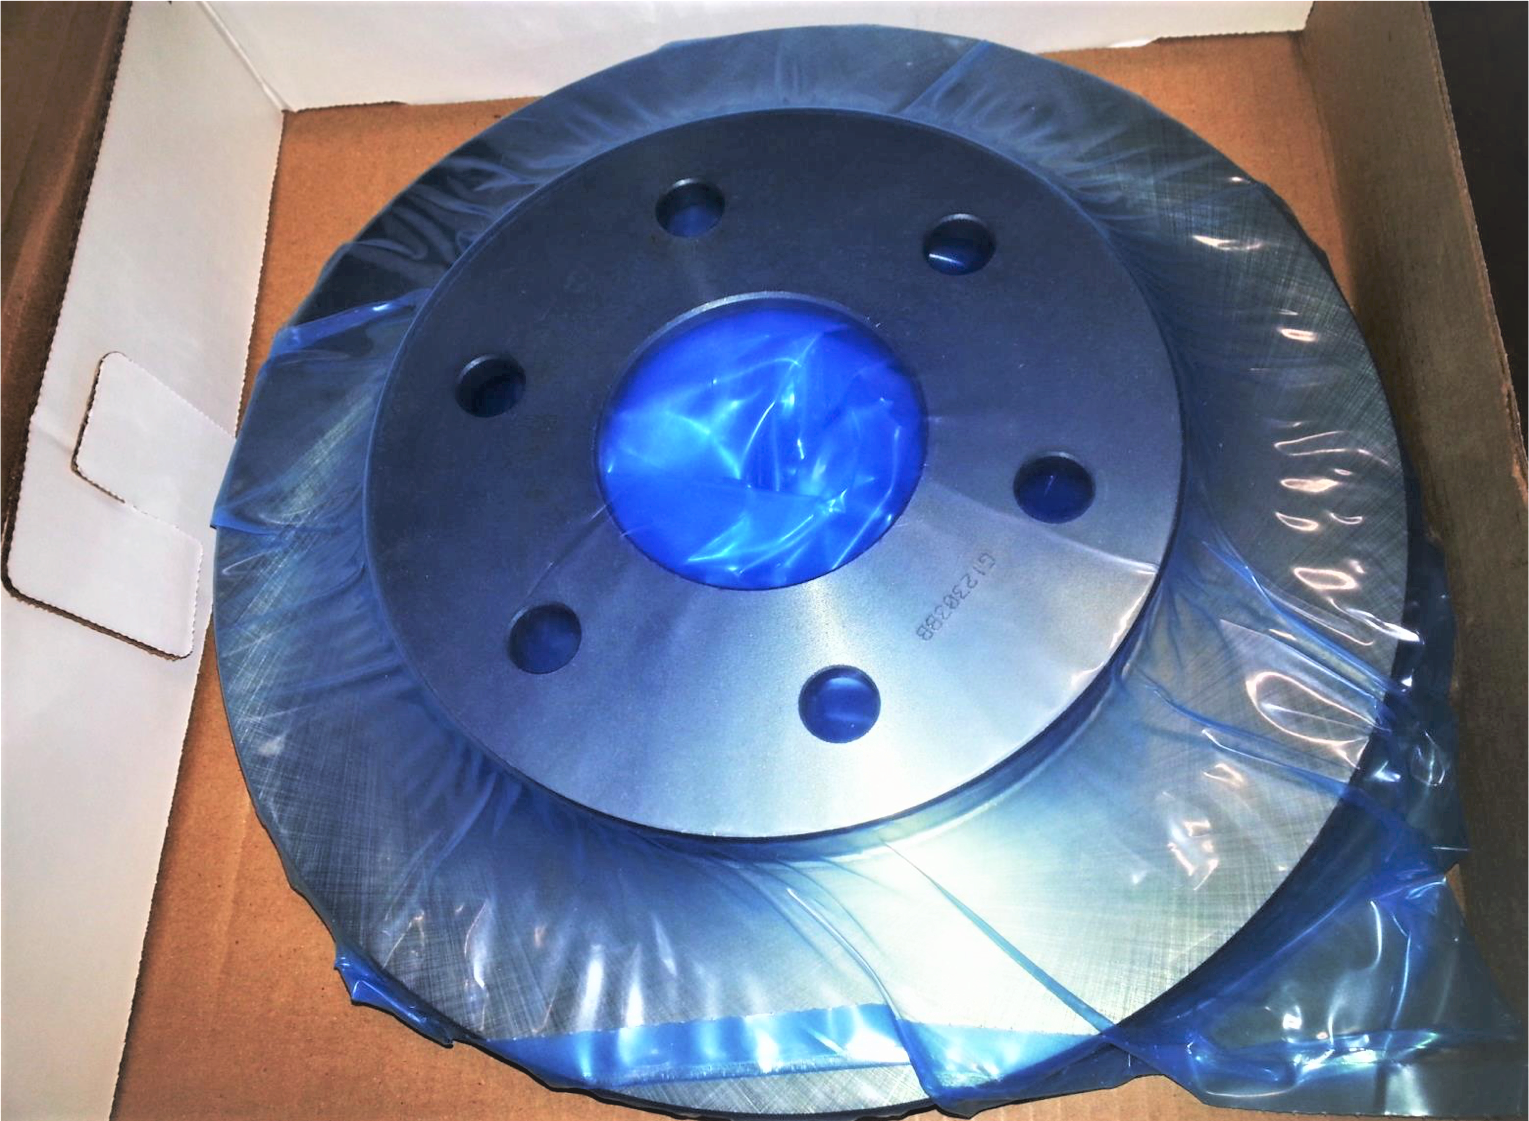 Car part in box wrapped in blue VCI film